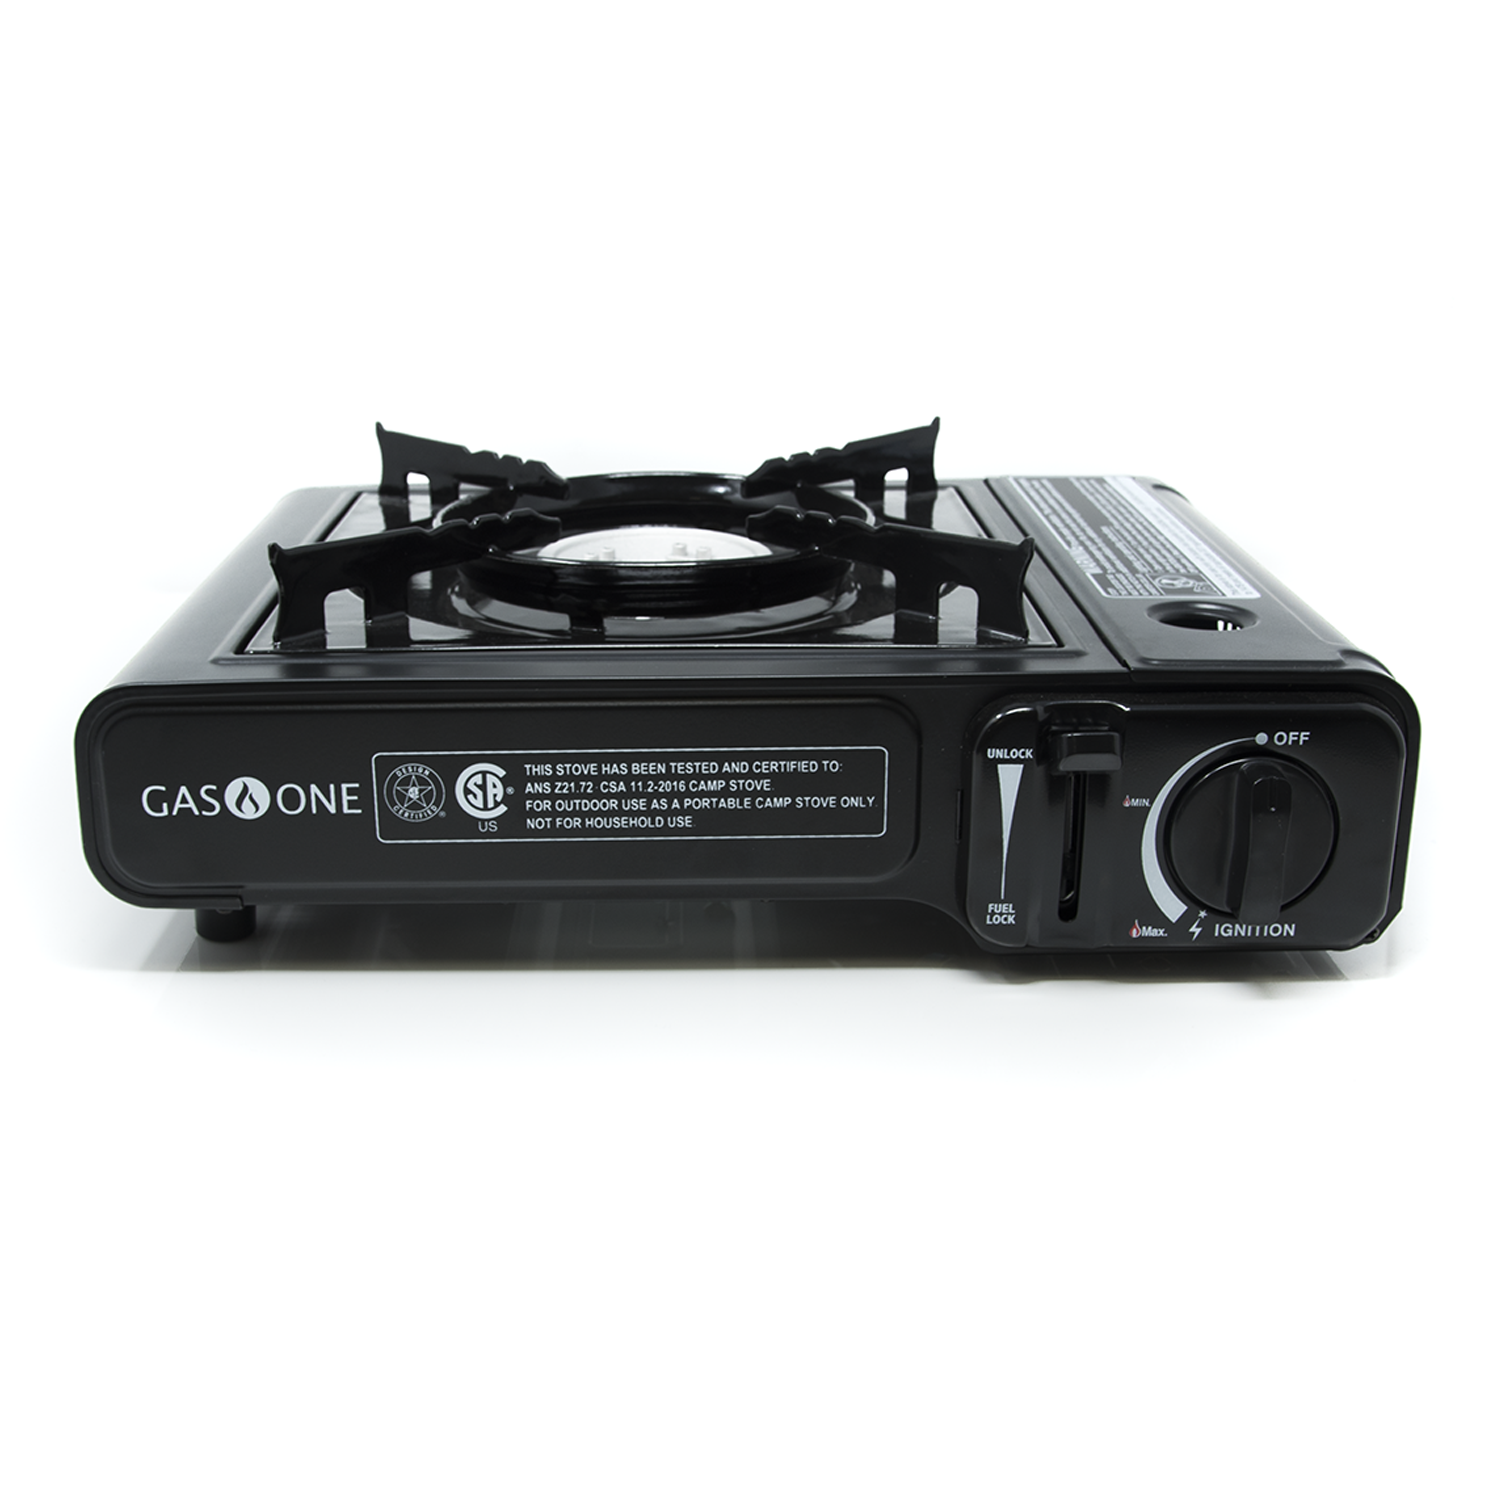 Gas One GS-3400P Propane or Butane Stove Dual Fuel Stove Portable Camping  Stove - Patent Pending - with Carrying Case Great for Emergency  Preparedness